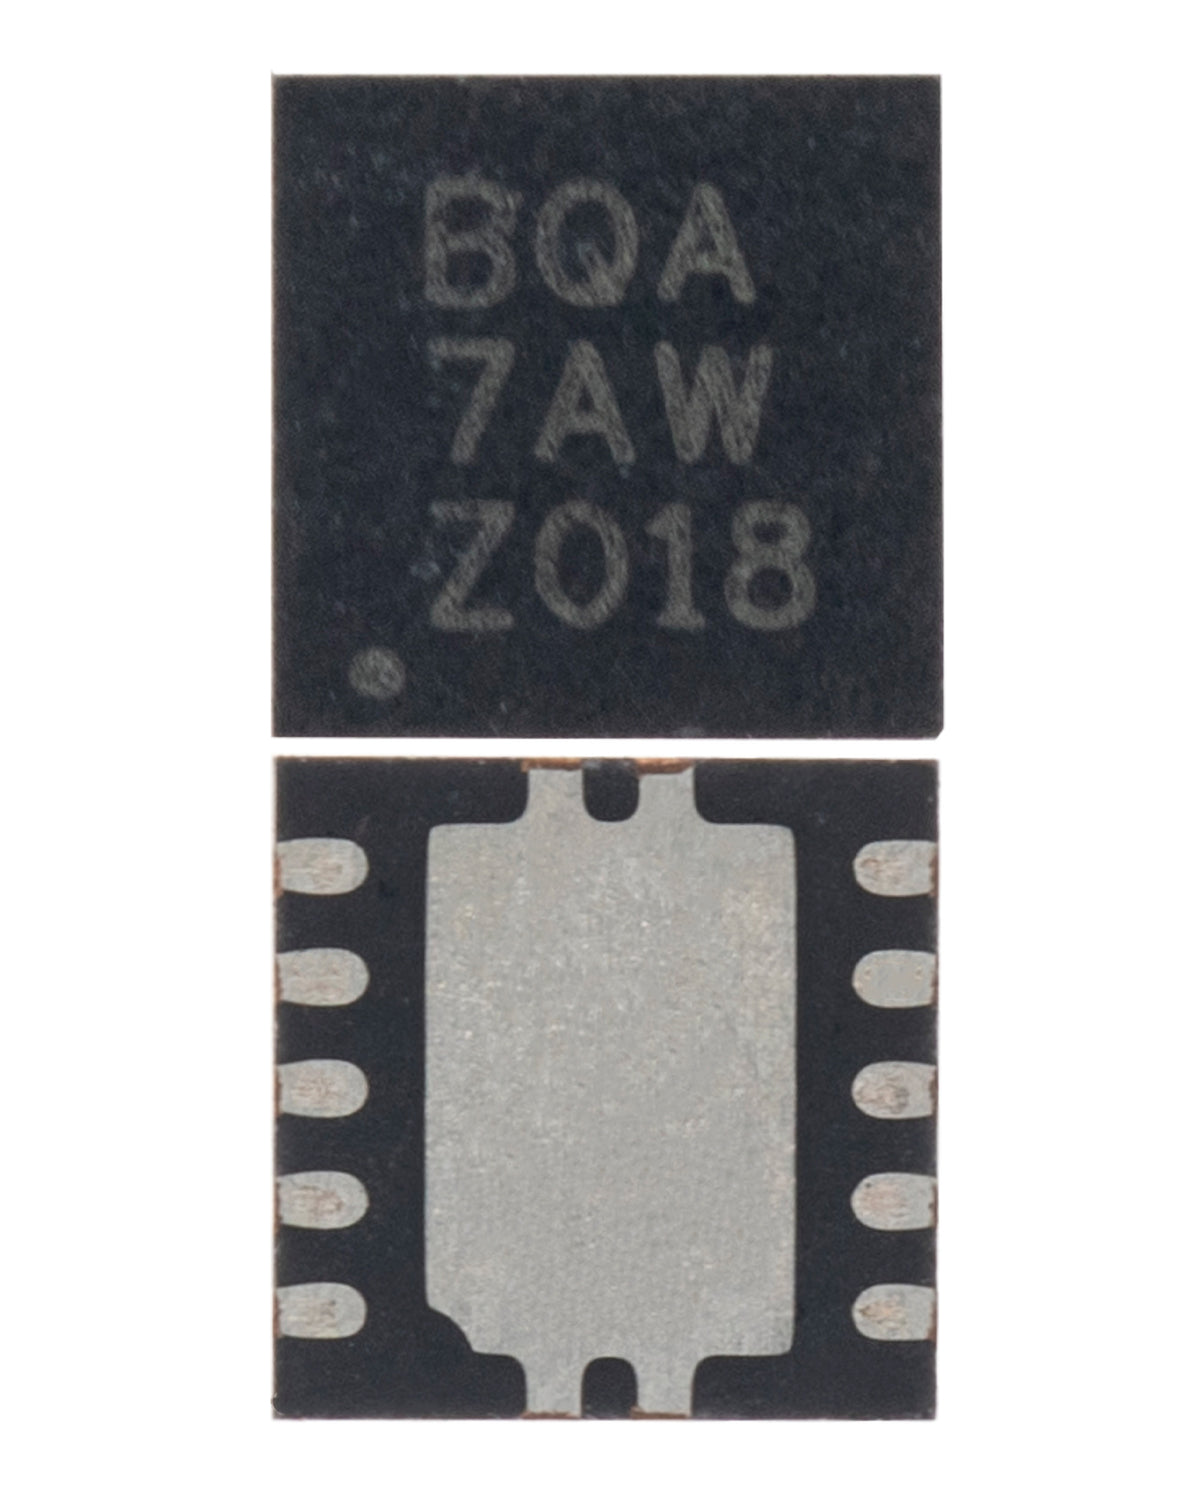 DC TO DC CONVERTER AND SWITCHING REGULATOR CONVERTER IC COMPATIBLE WITH MACBOOK (TPS62510DRCT / TPS62510DRCR: BQA SON-10 PIN)